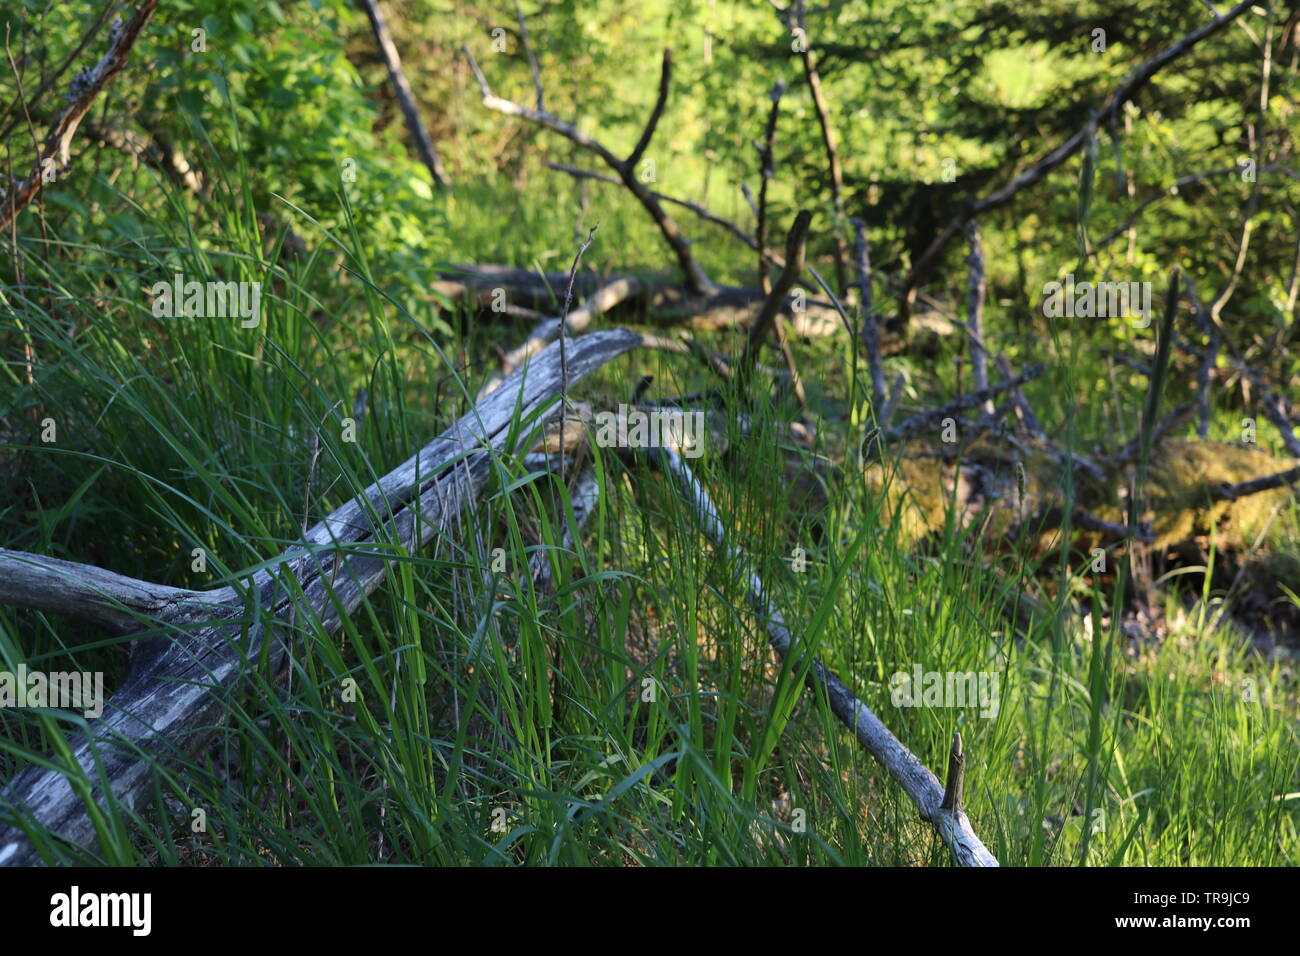 A dry tree branch on green grass. Stock Photo